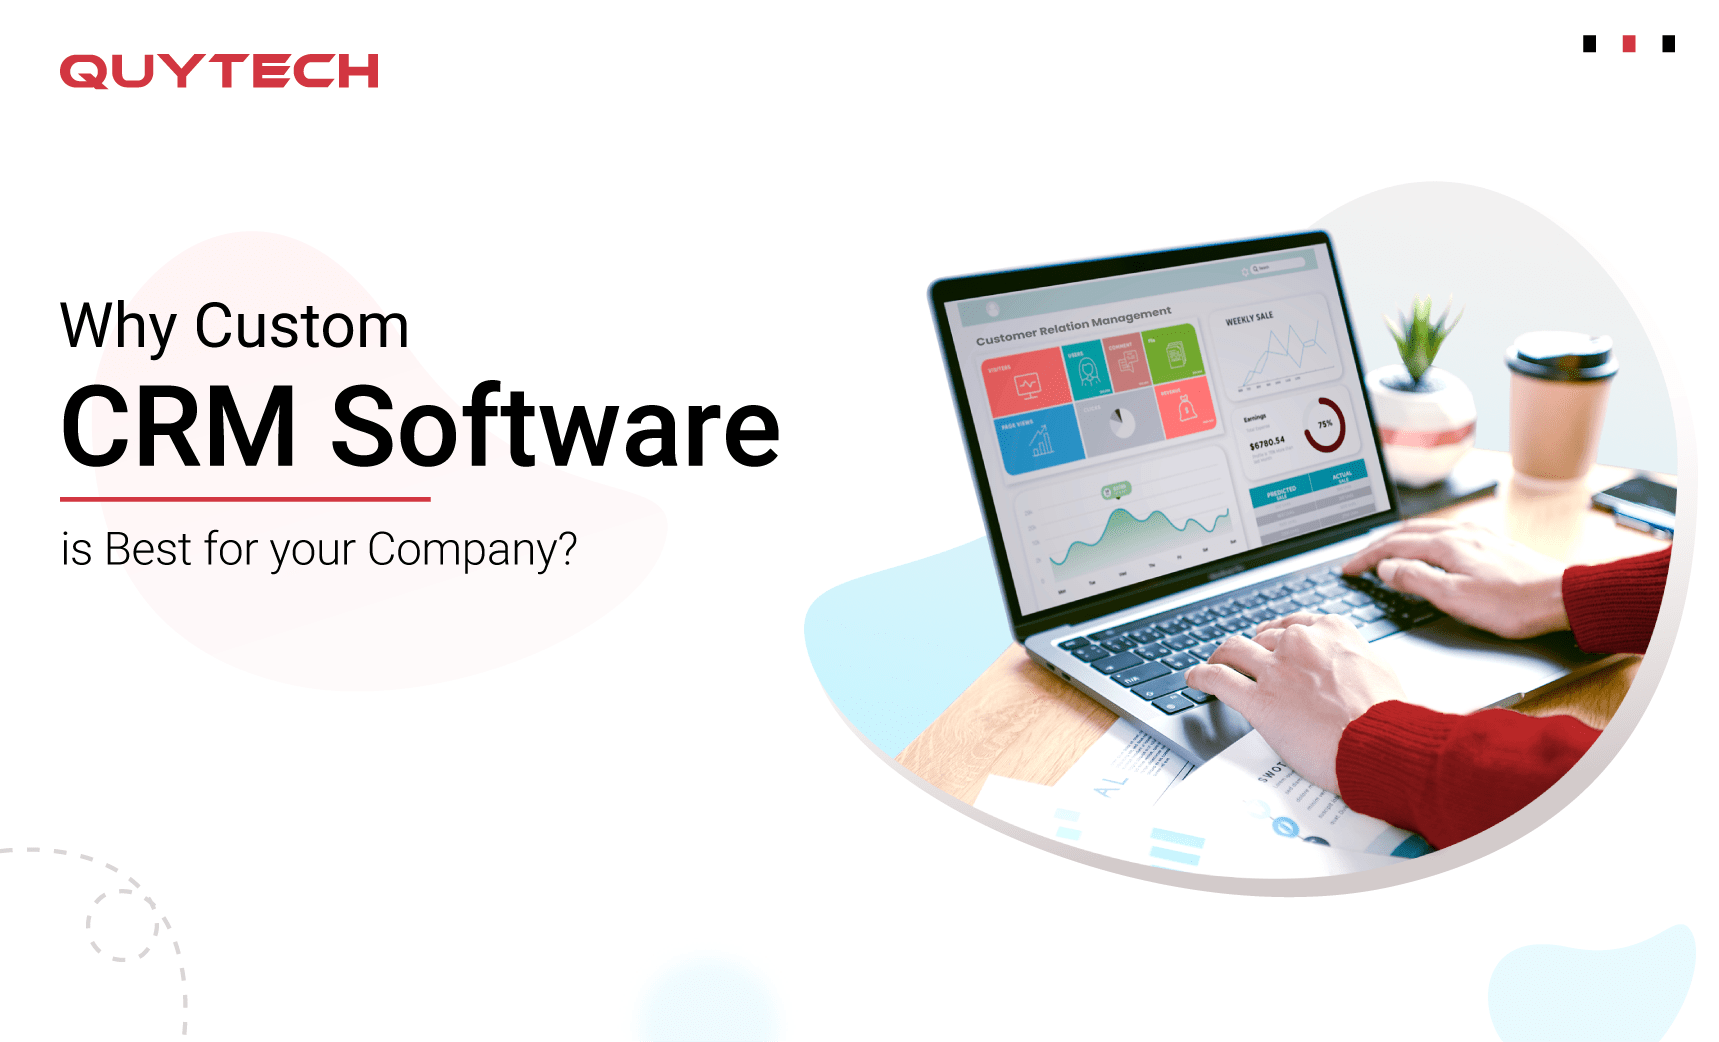 Why Custom CRM Software is Best for your Company